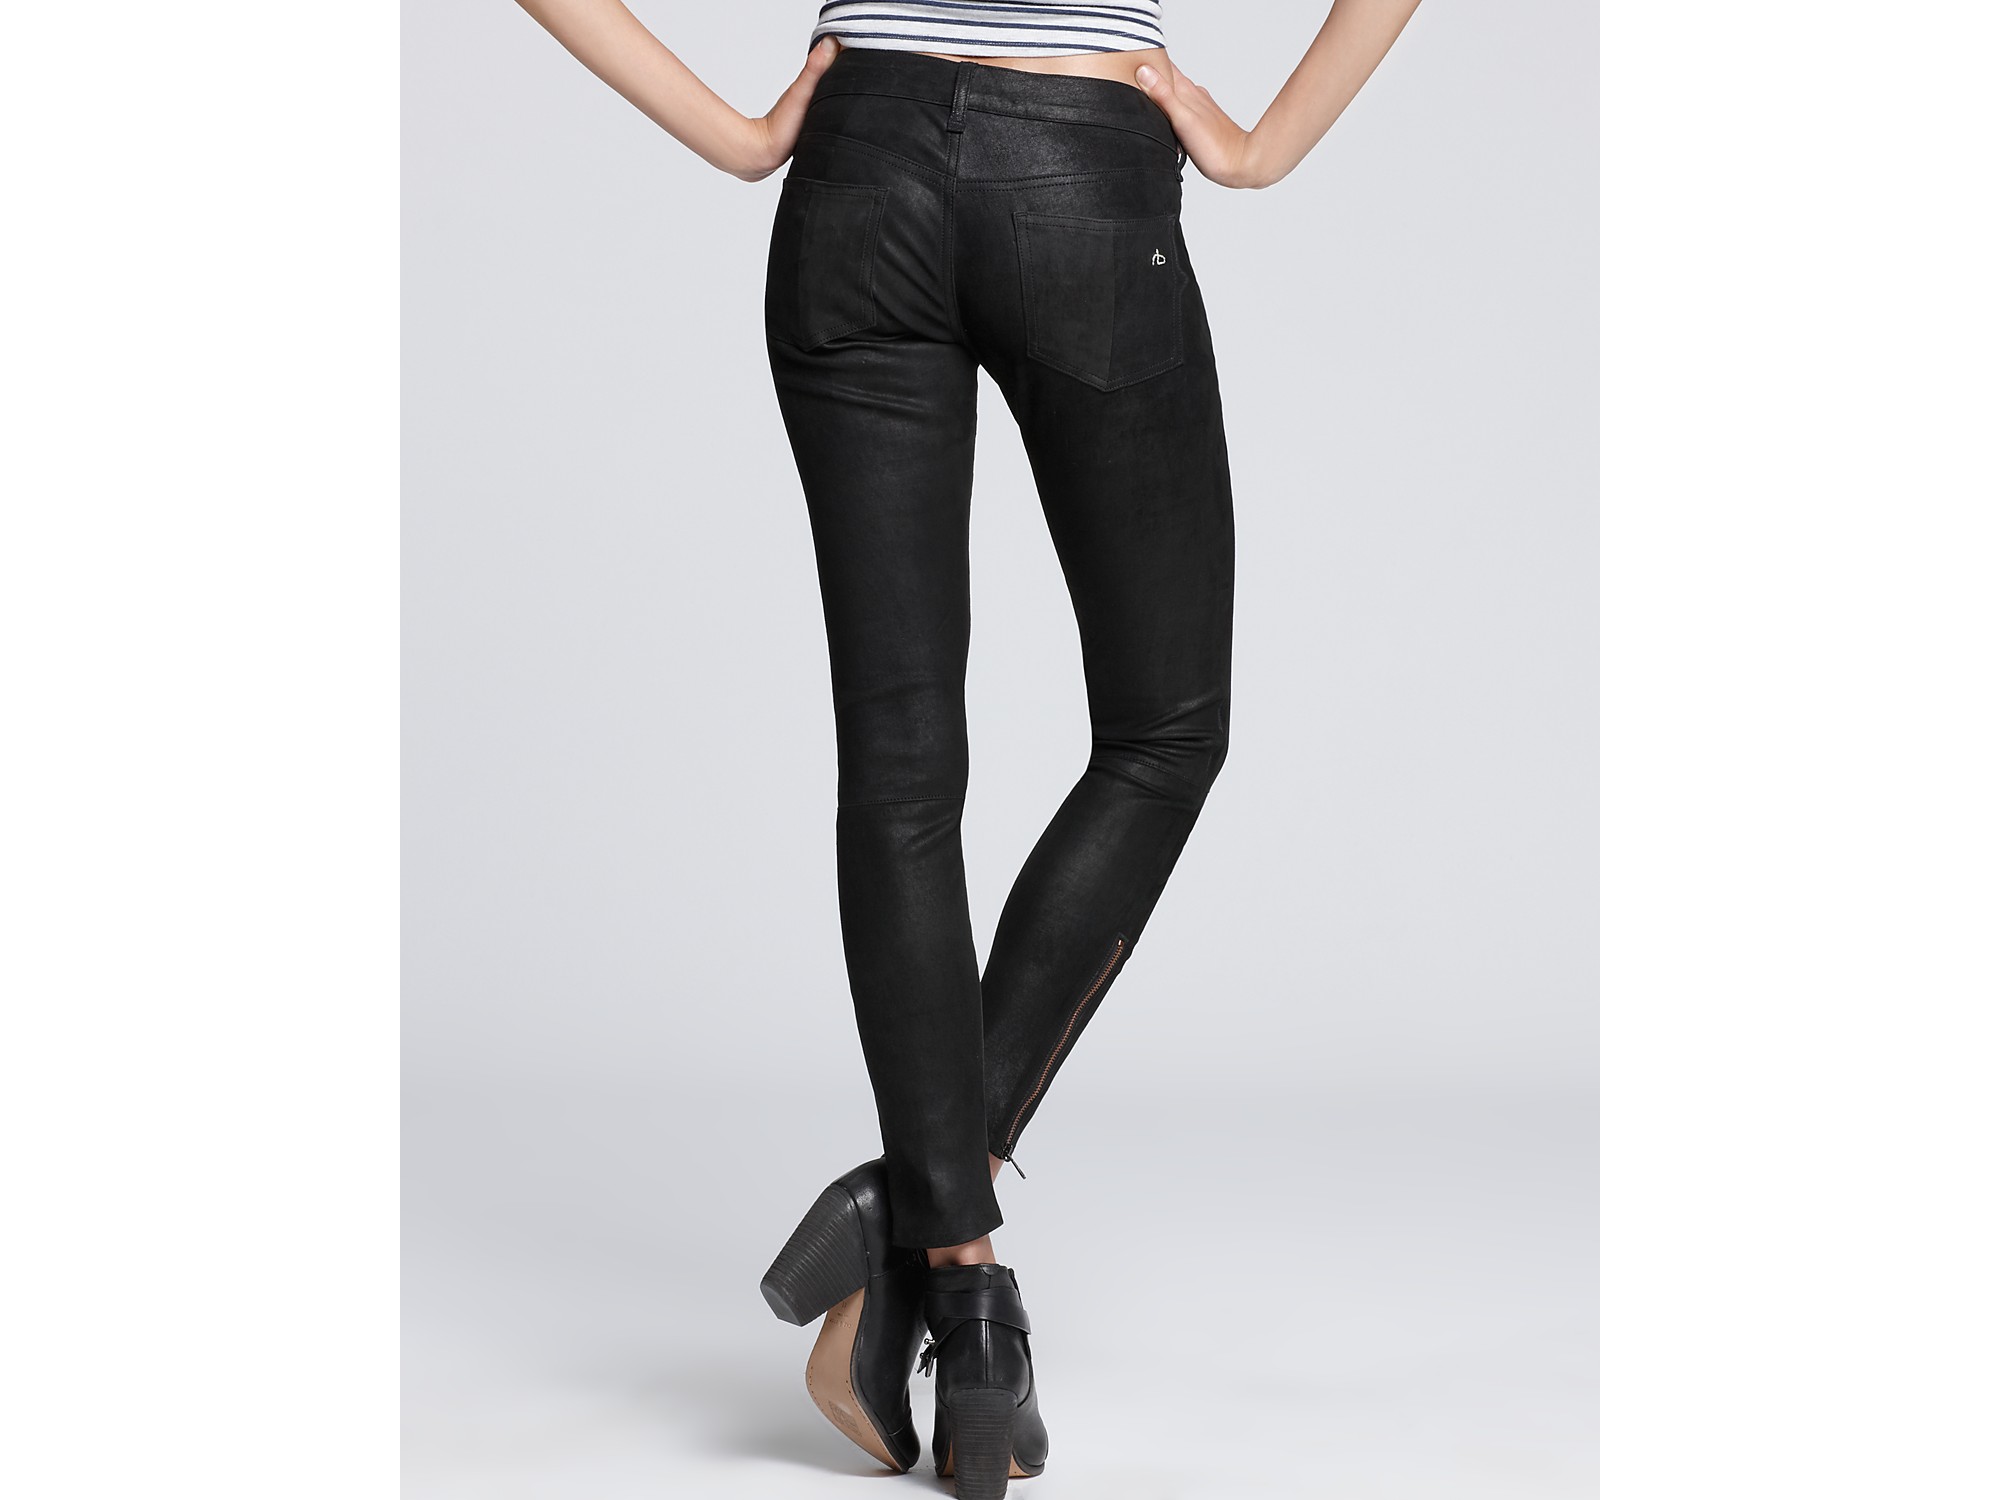 Lyst - Rag & Bone Leather Leggings Rbw 23 Mid Rise with Zippers in Black